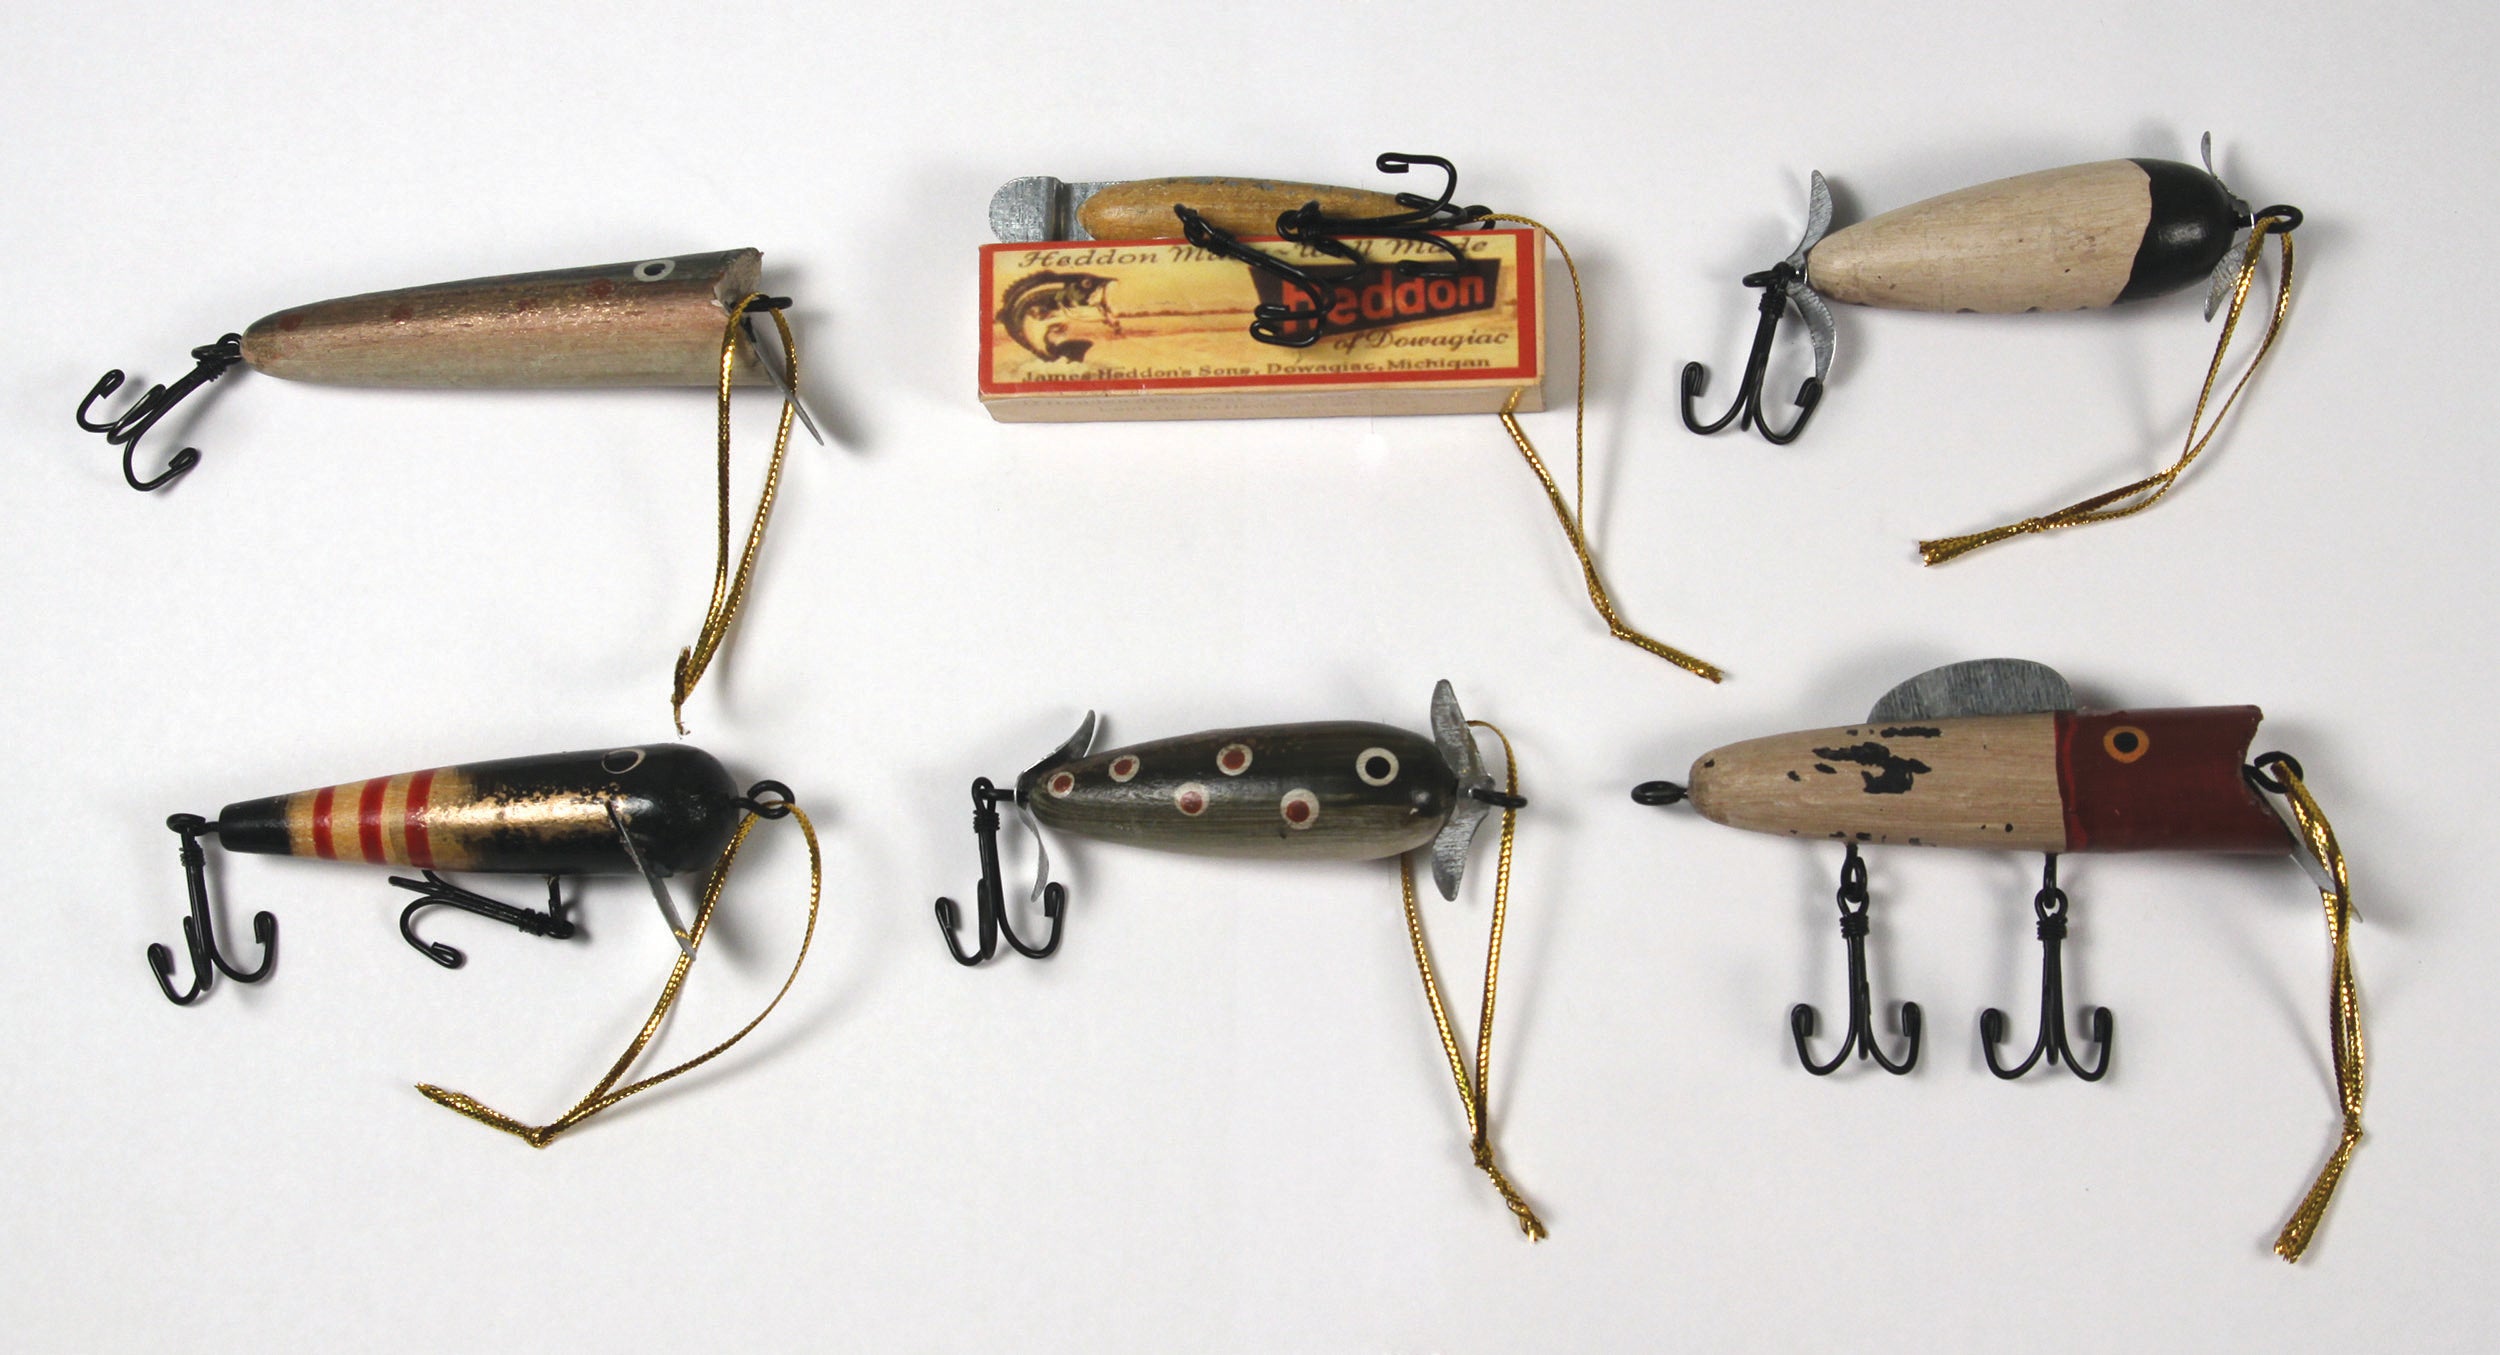 Set of 6 Antique/vintage Fishing Lures, Tackle, Gear, Freshwater, Saltwater,  Fishing, Folk Art, Handmade, Bait, Listing is for Set of Six -  Ireland